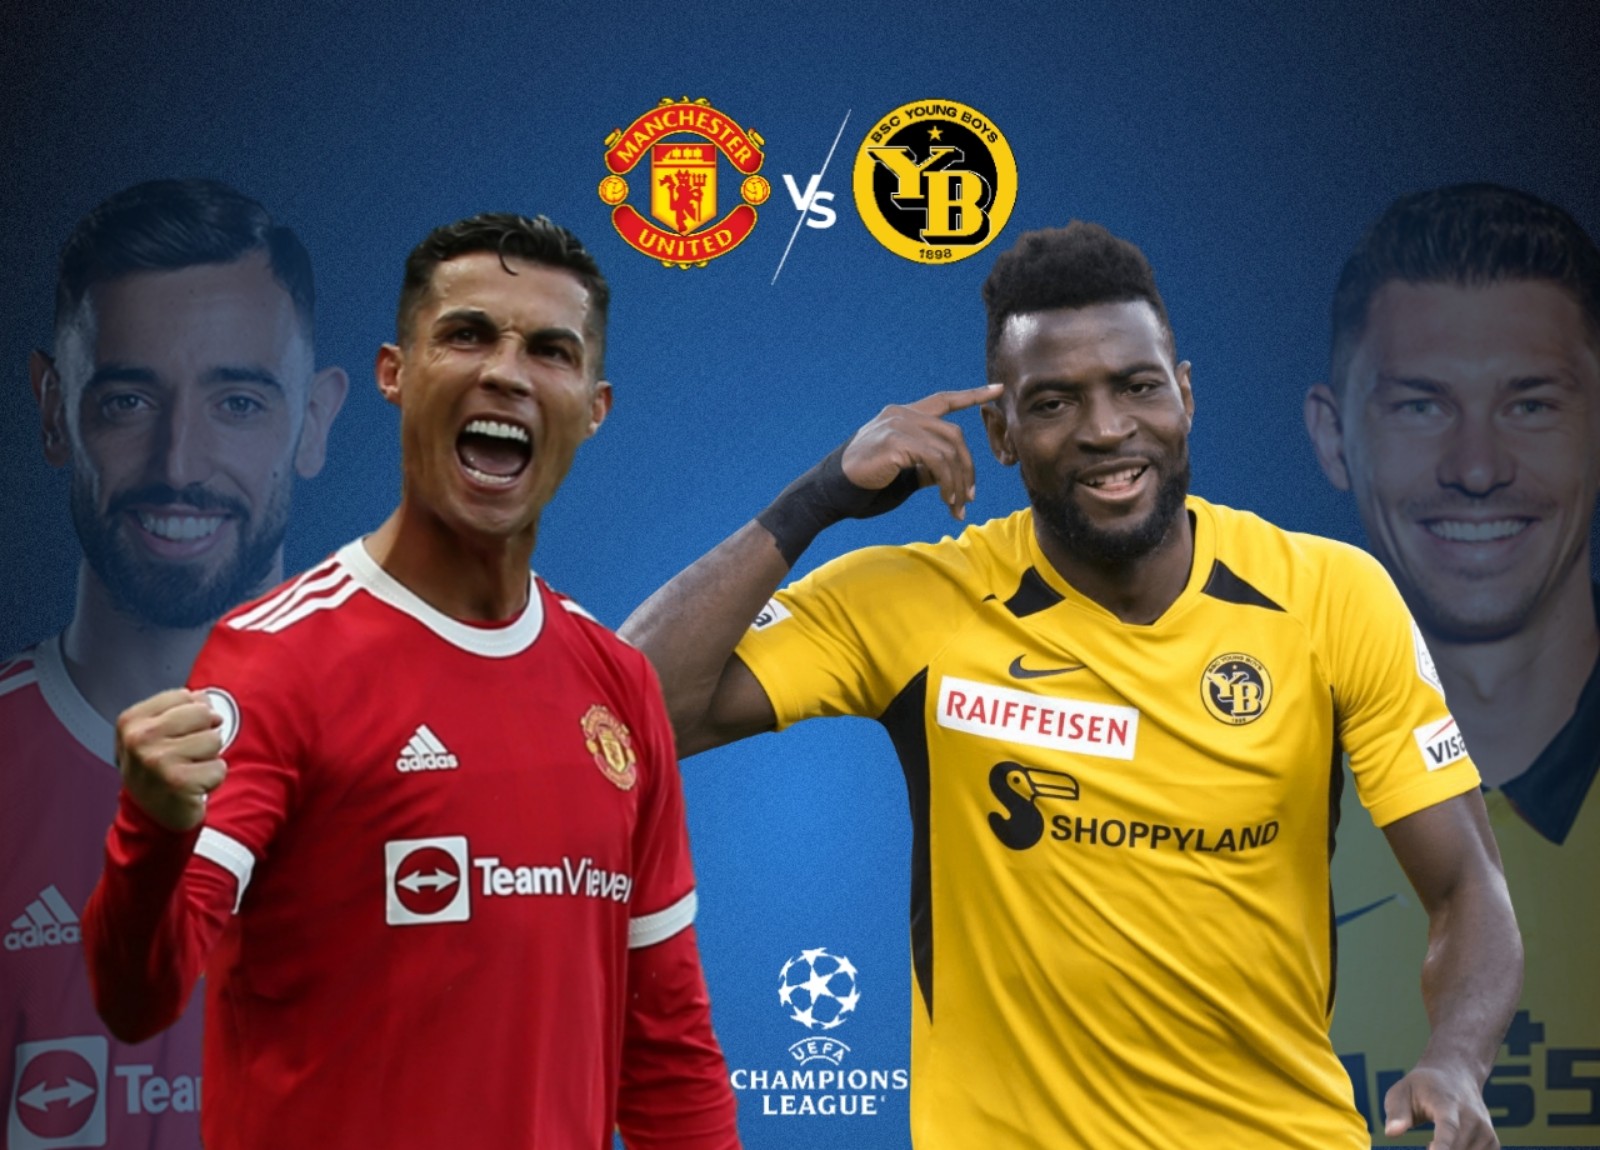 Young Boys 2-1 Manchester United 2021.09.14 (18h45) Watch Full Goals Highlight Extended (20 Minutes)